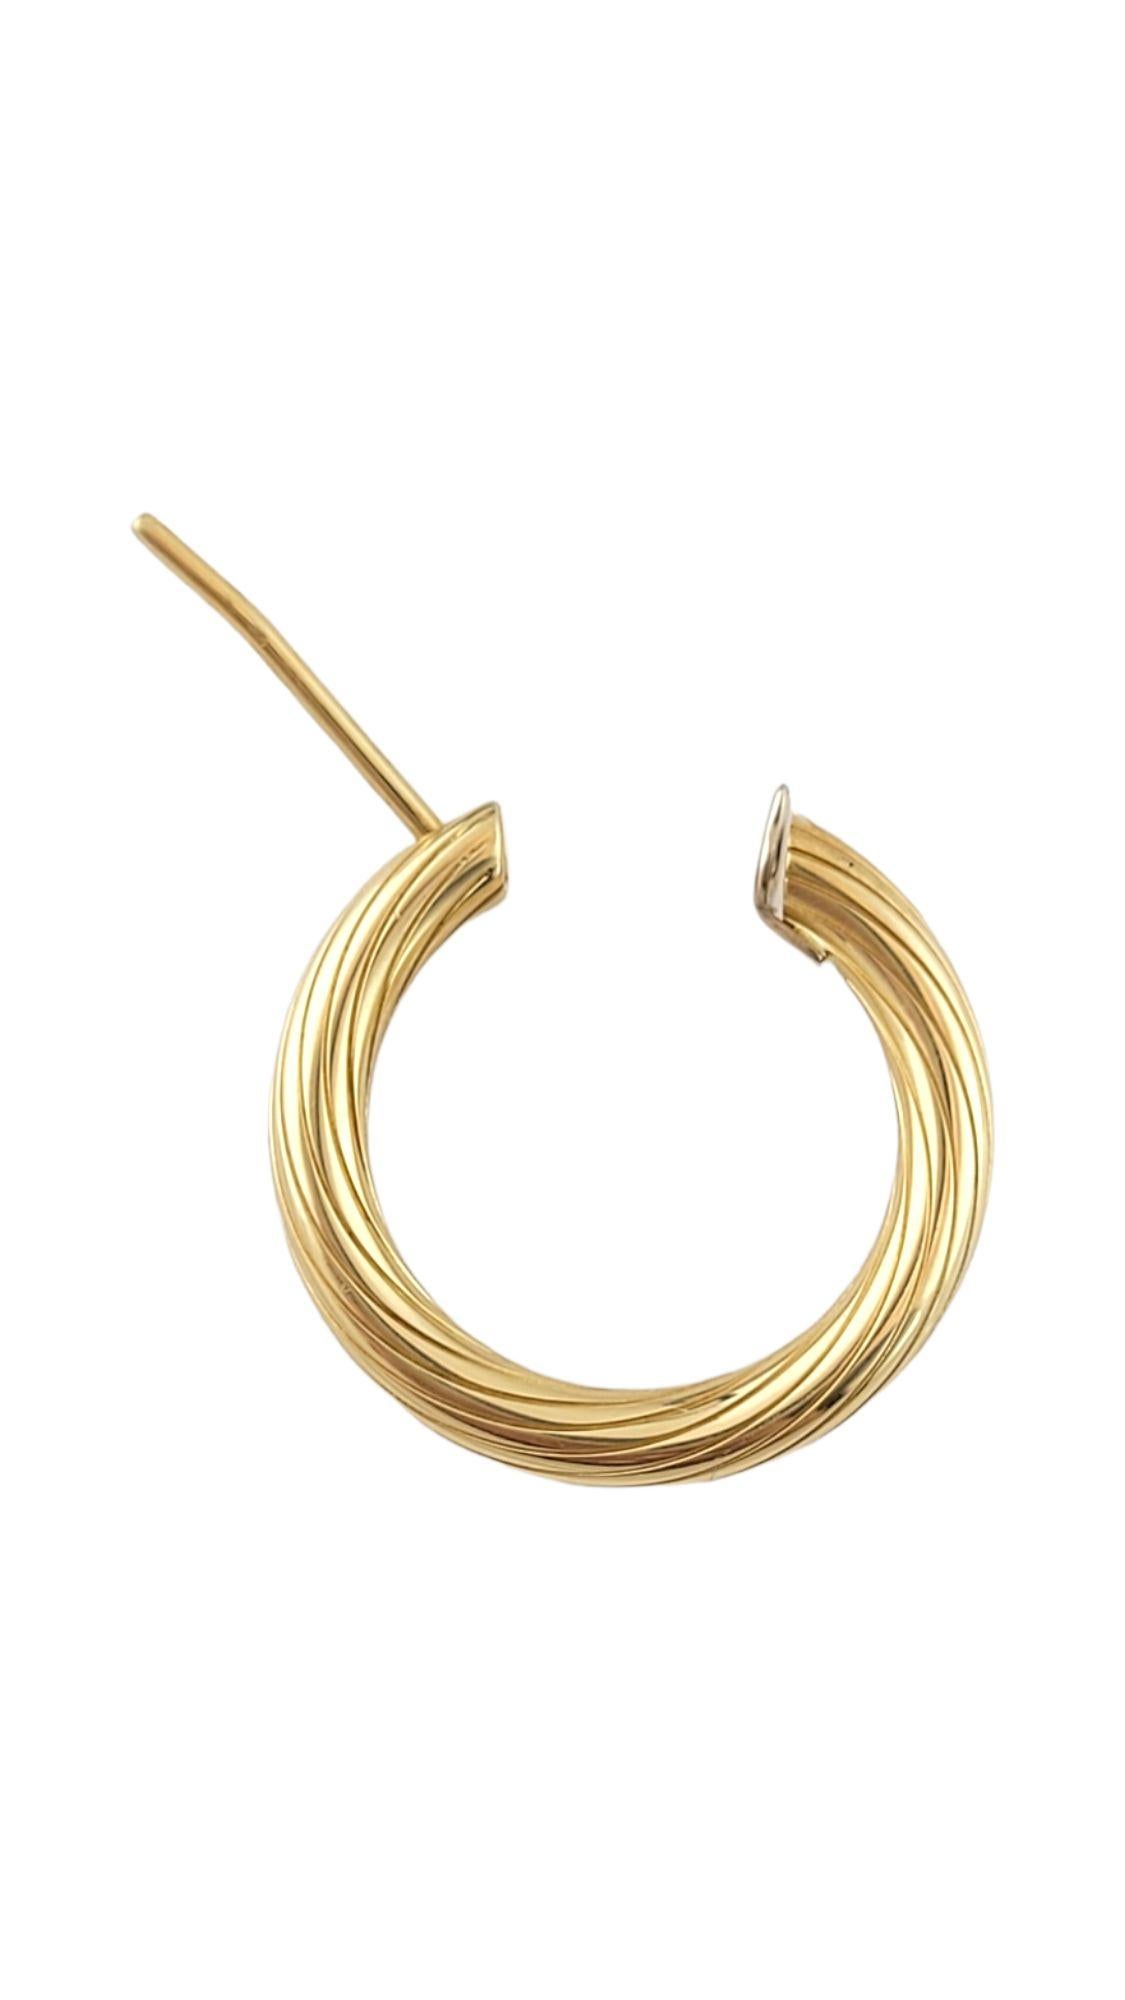 18K Yellow Gold Textured Hoop Earrings #14537 In Good Condition For Sale In Washington Depot, CT